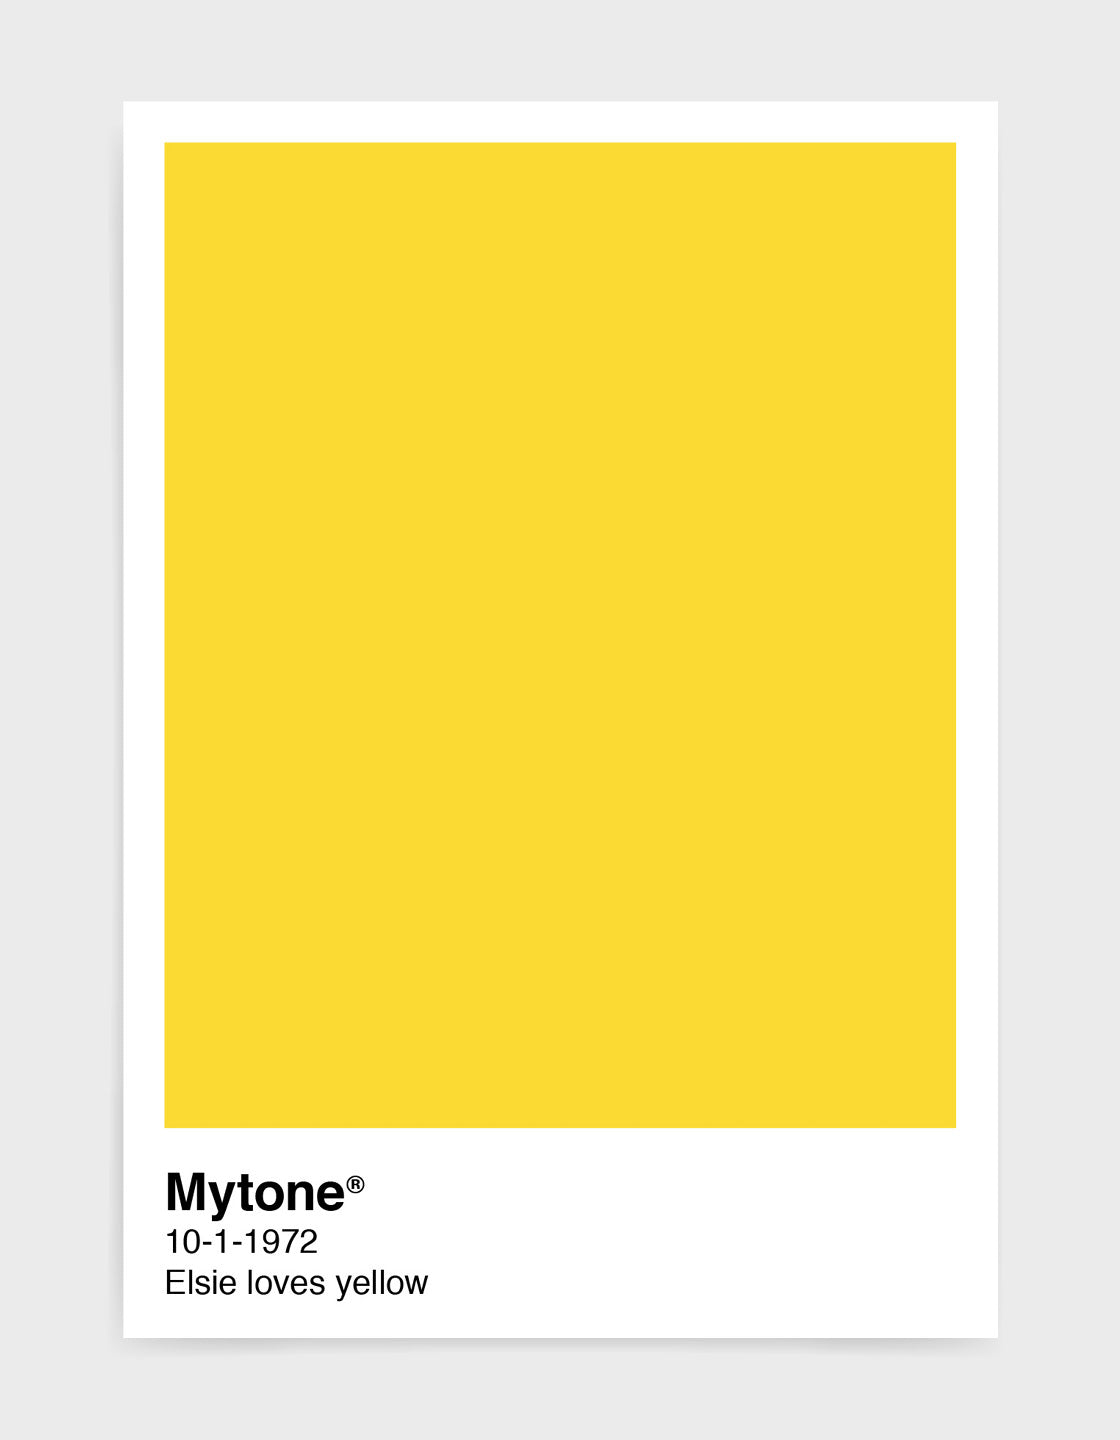 Pantone style art print with custom colour and text image shows yellow print